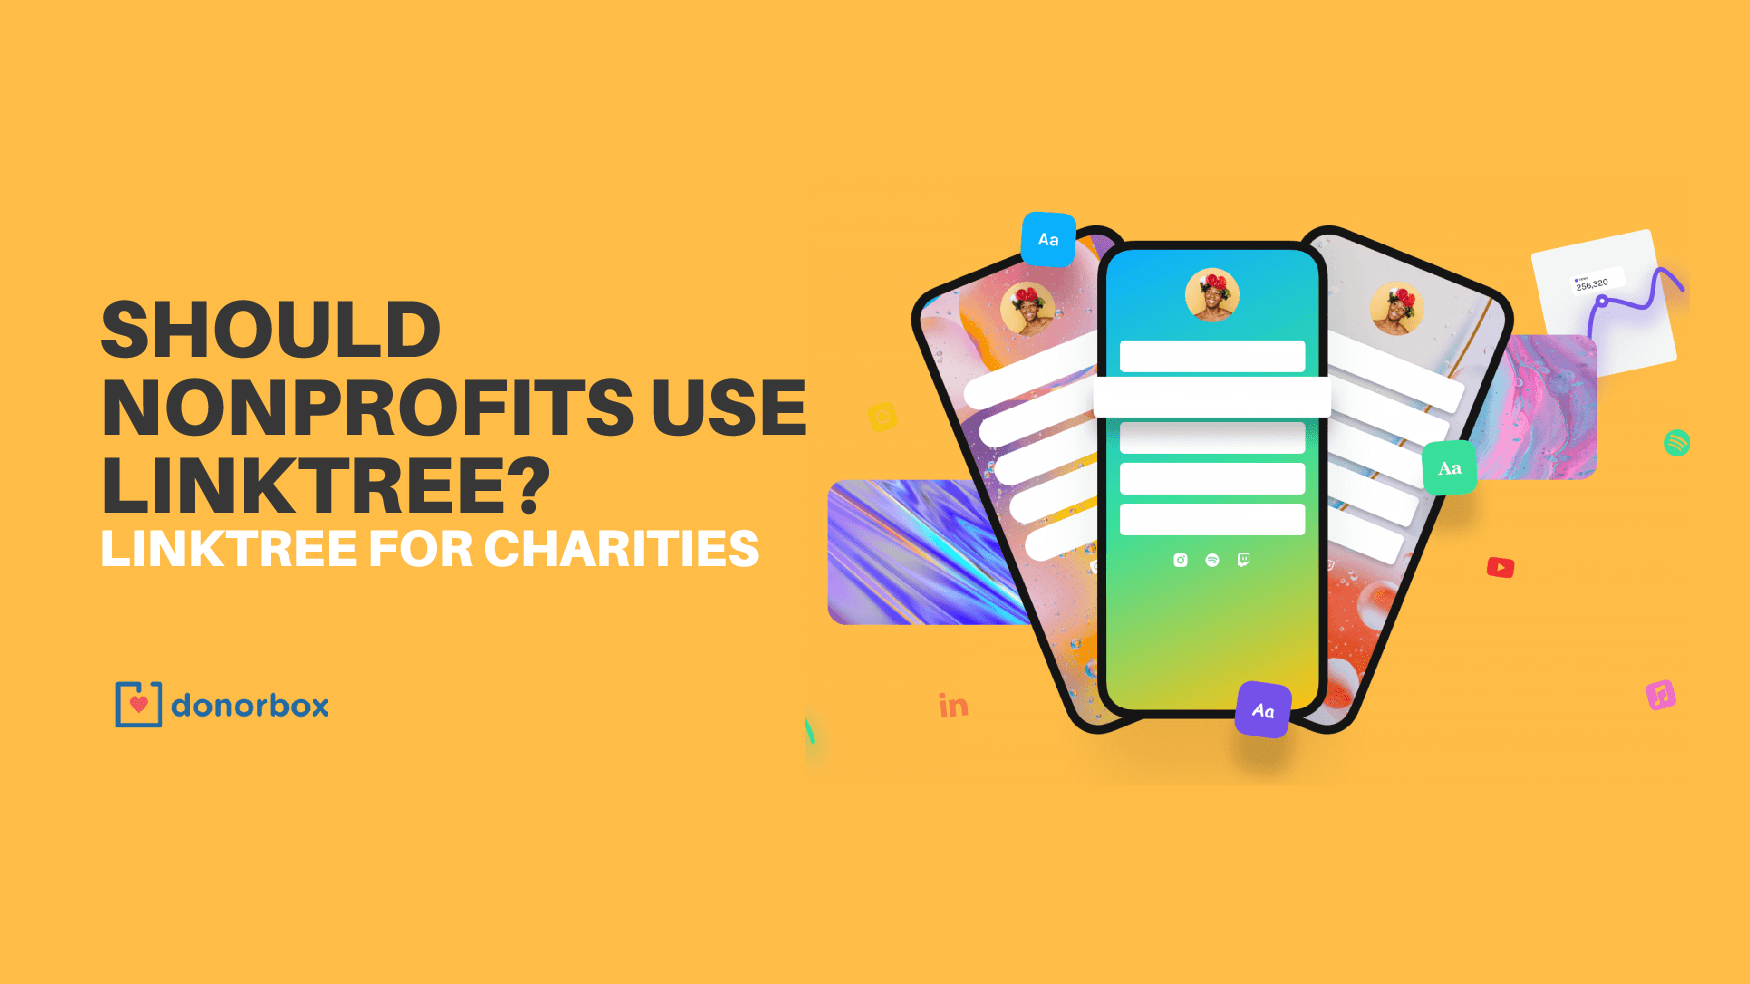 Linktree for Charities | How Does it Work for Nonprofits?